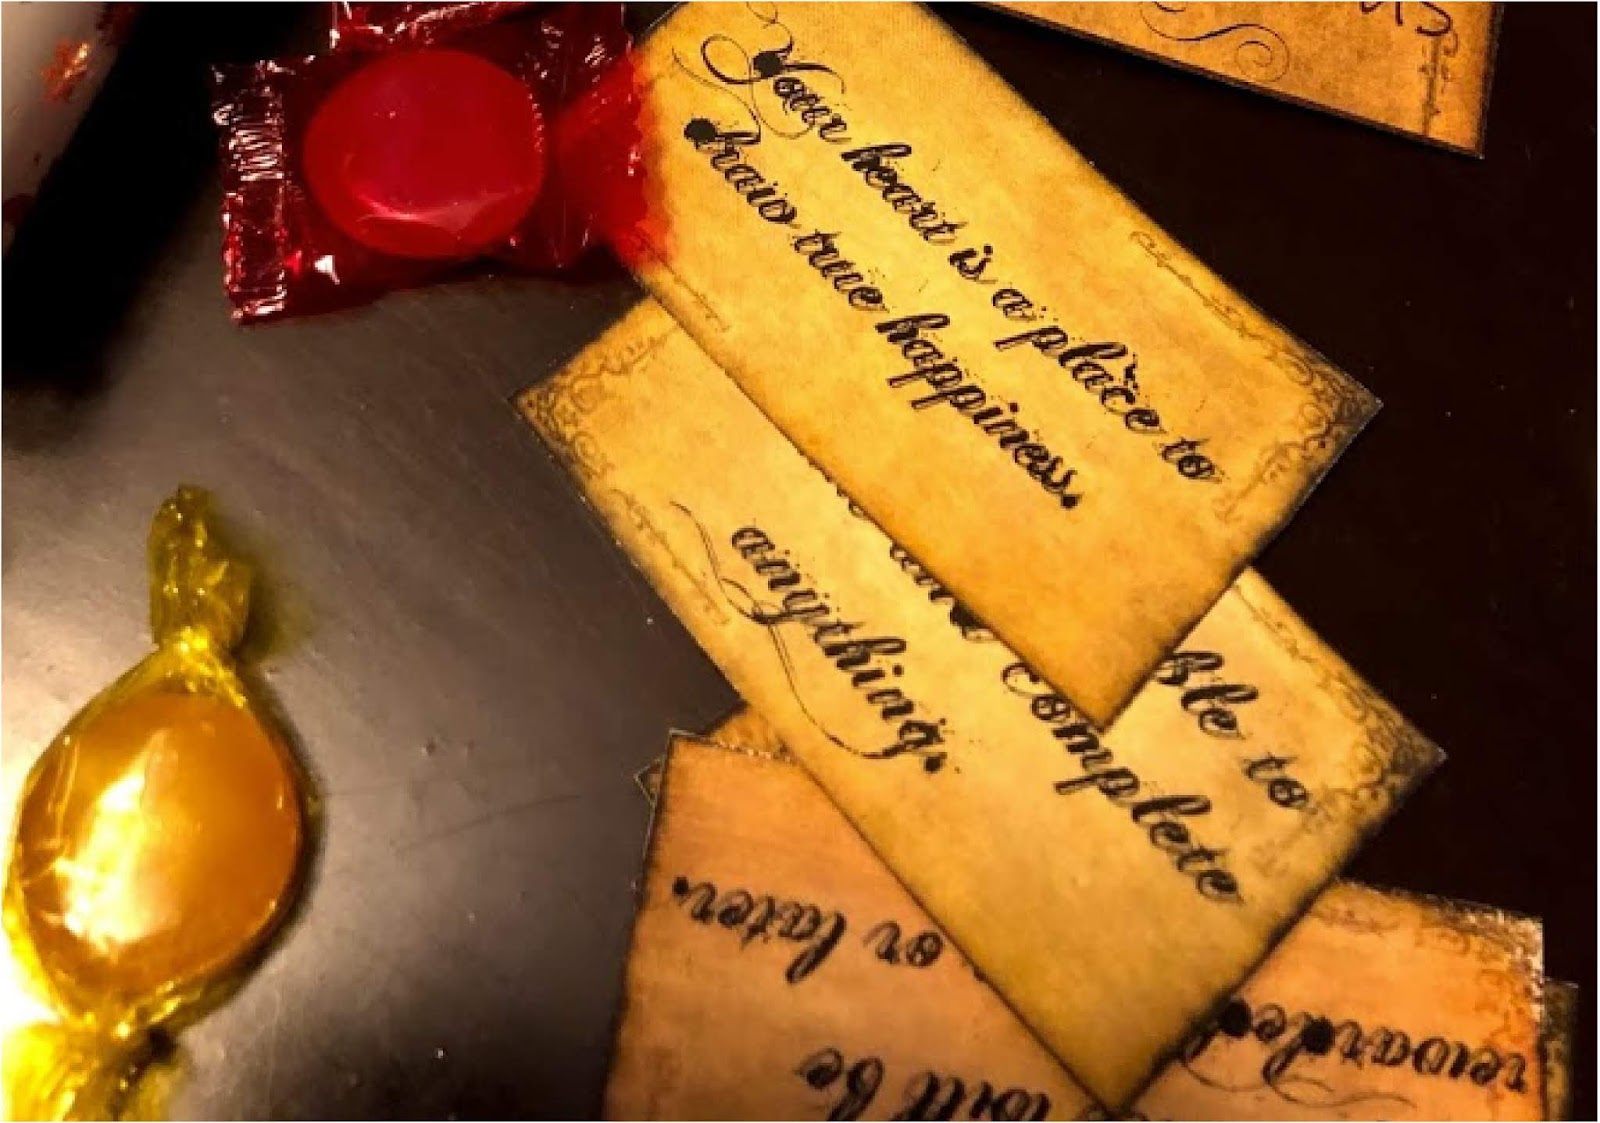 HollysHome Family Life: Harry Potter English Crackers Party Favors